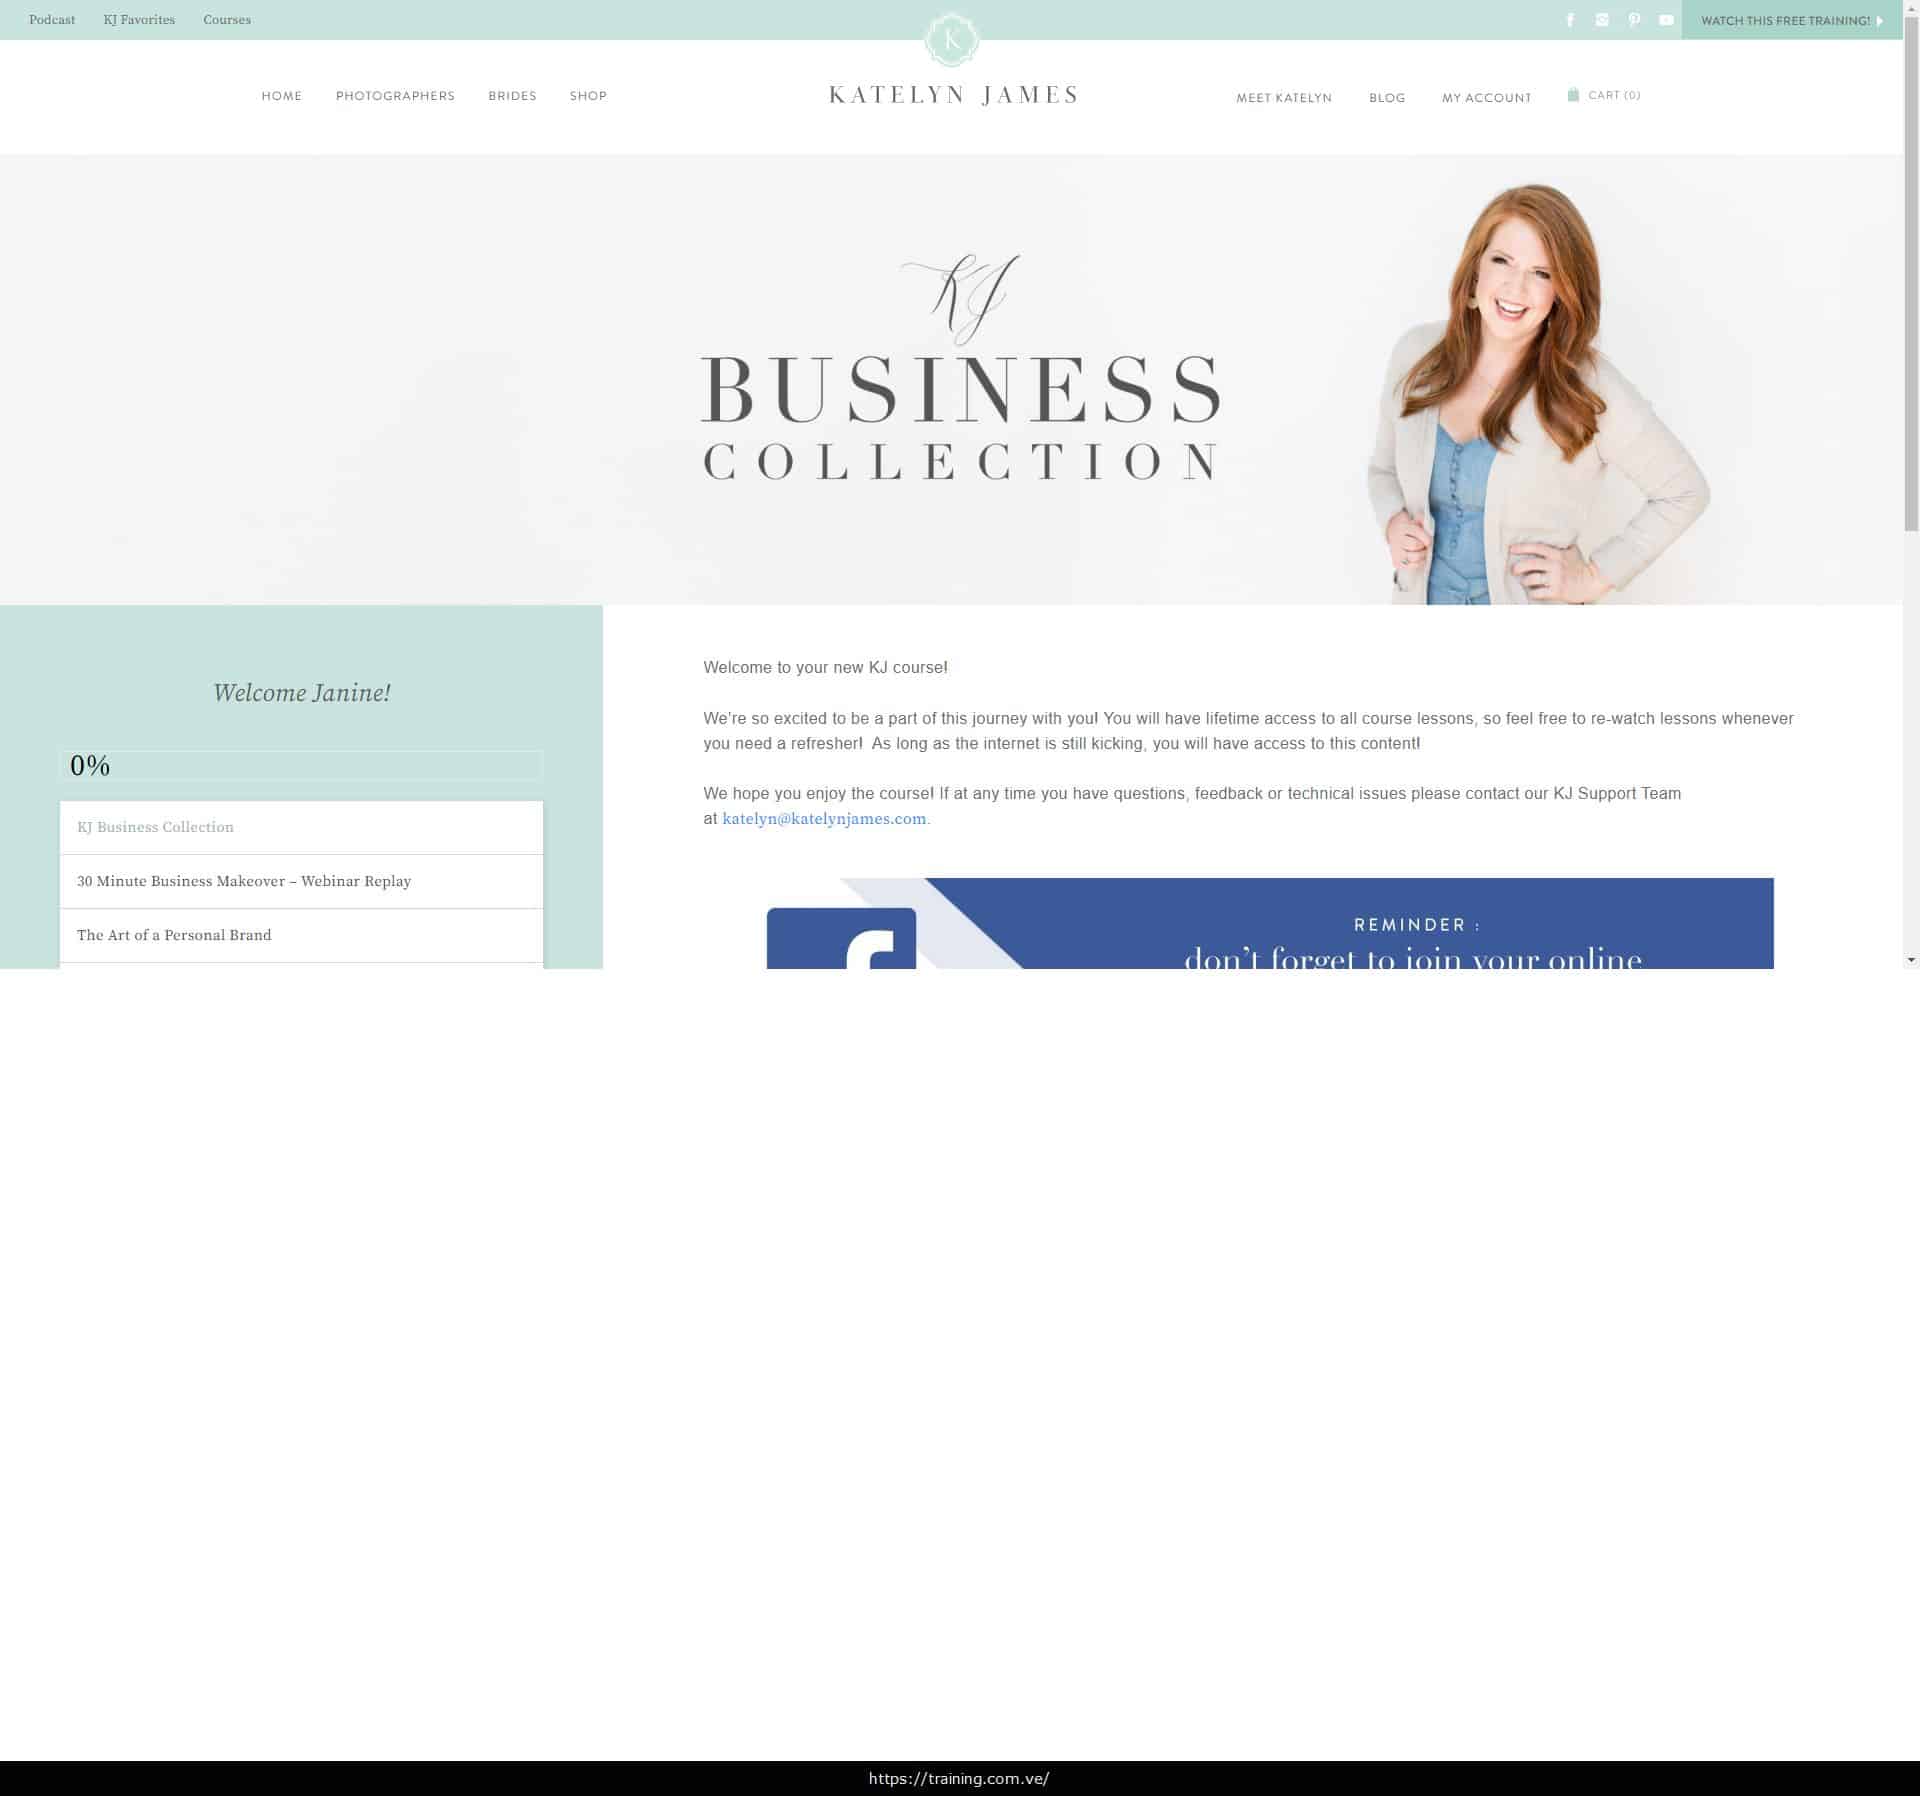 Download KJ Business Collection by Katelyn James